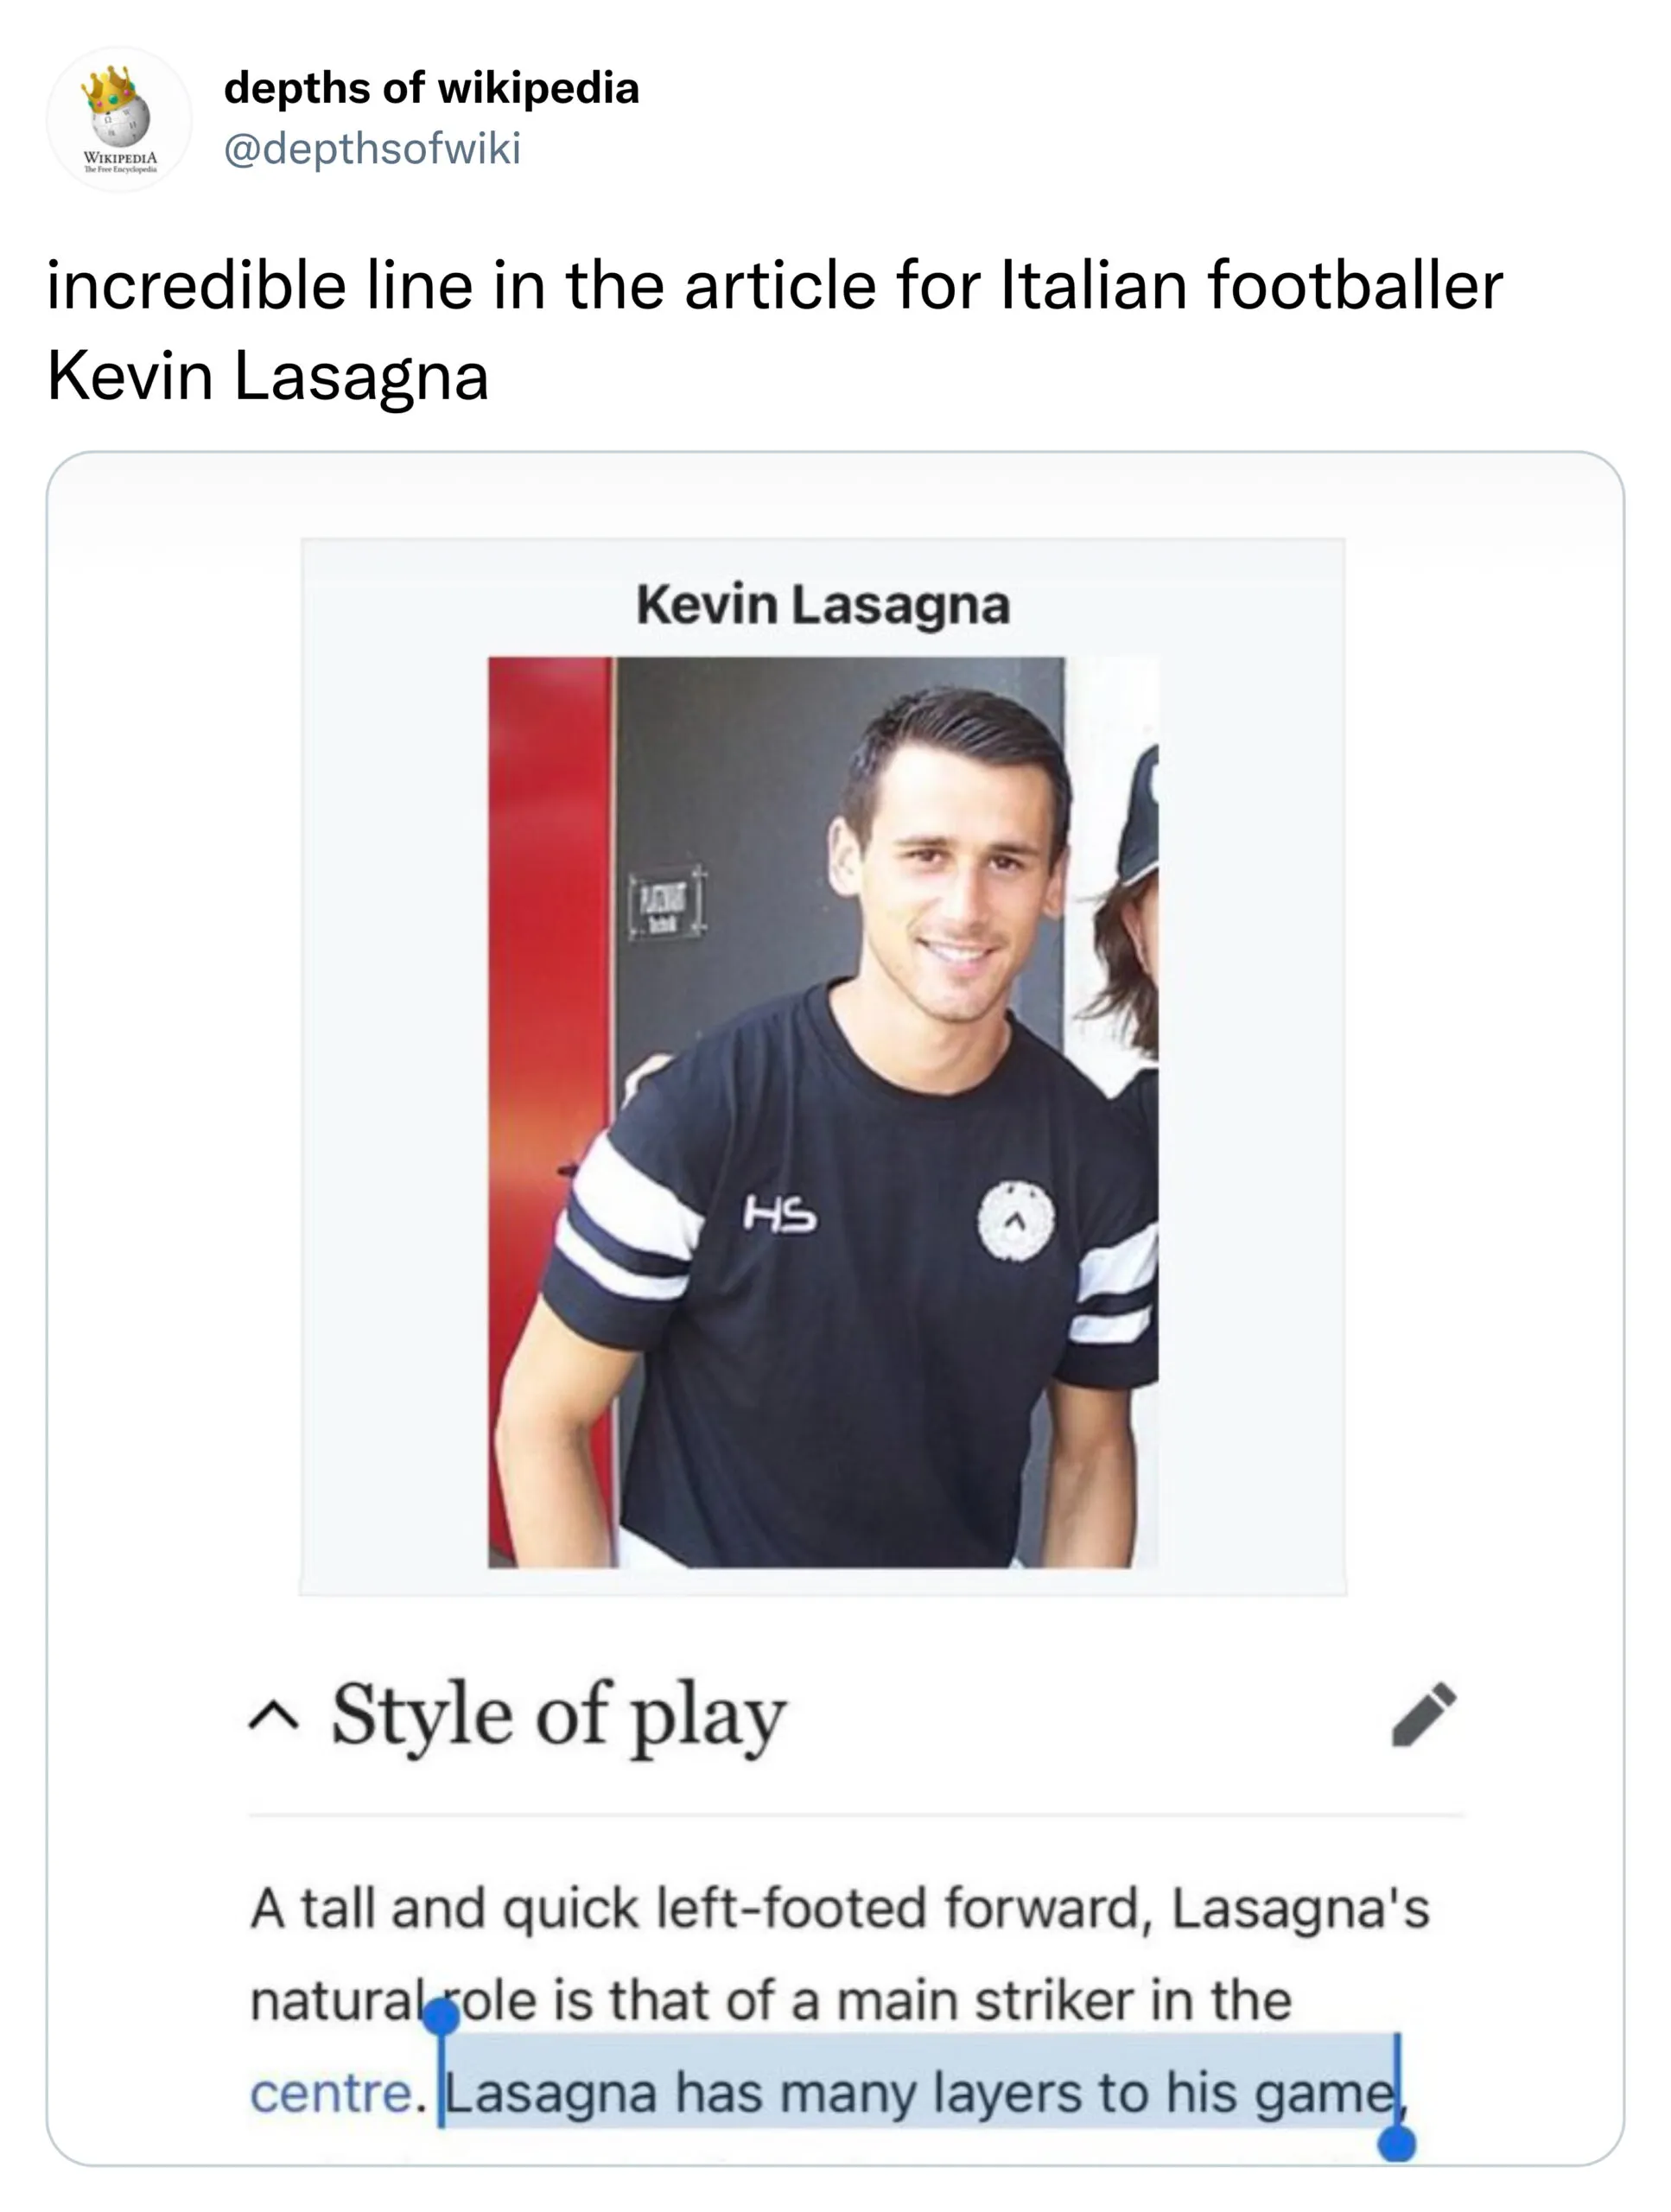 wikipedia blurb about athlete kevin lasagna having layers to his game